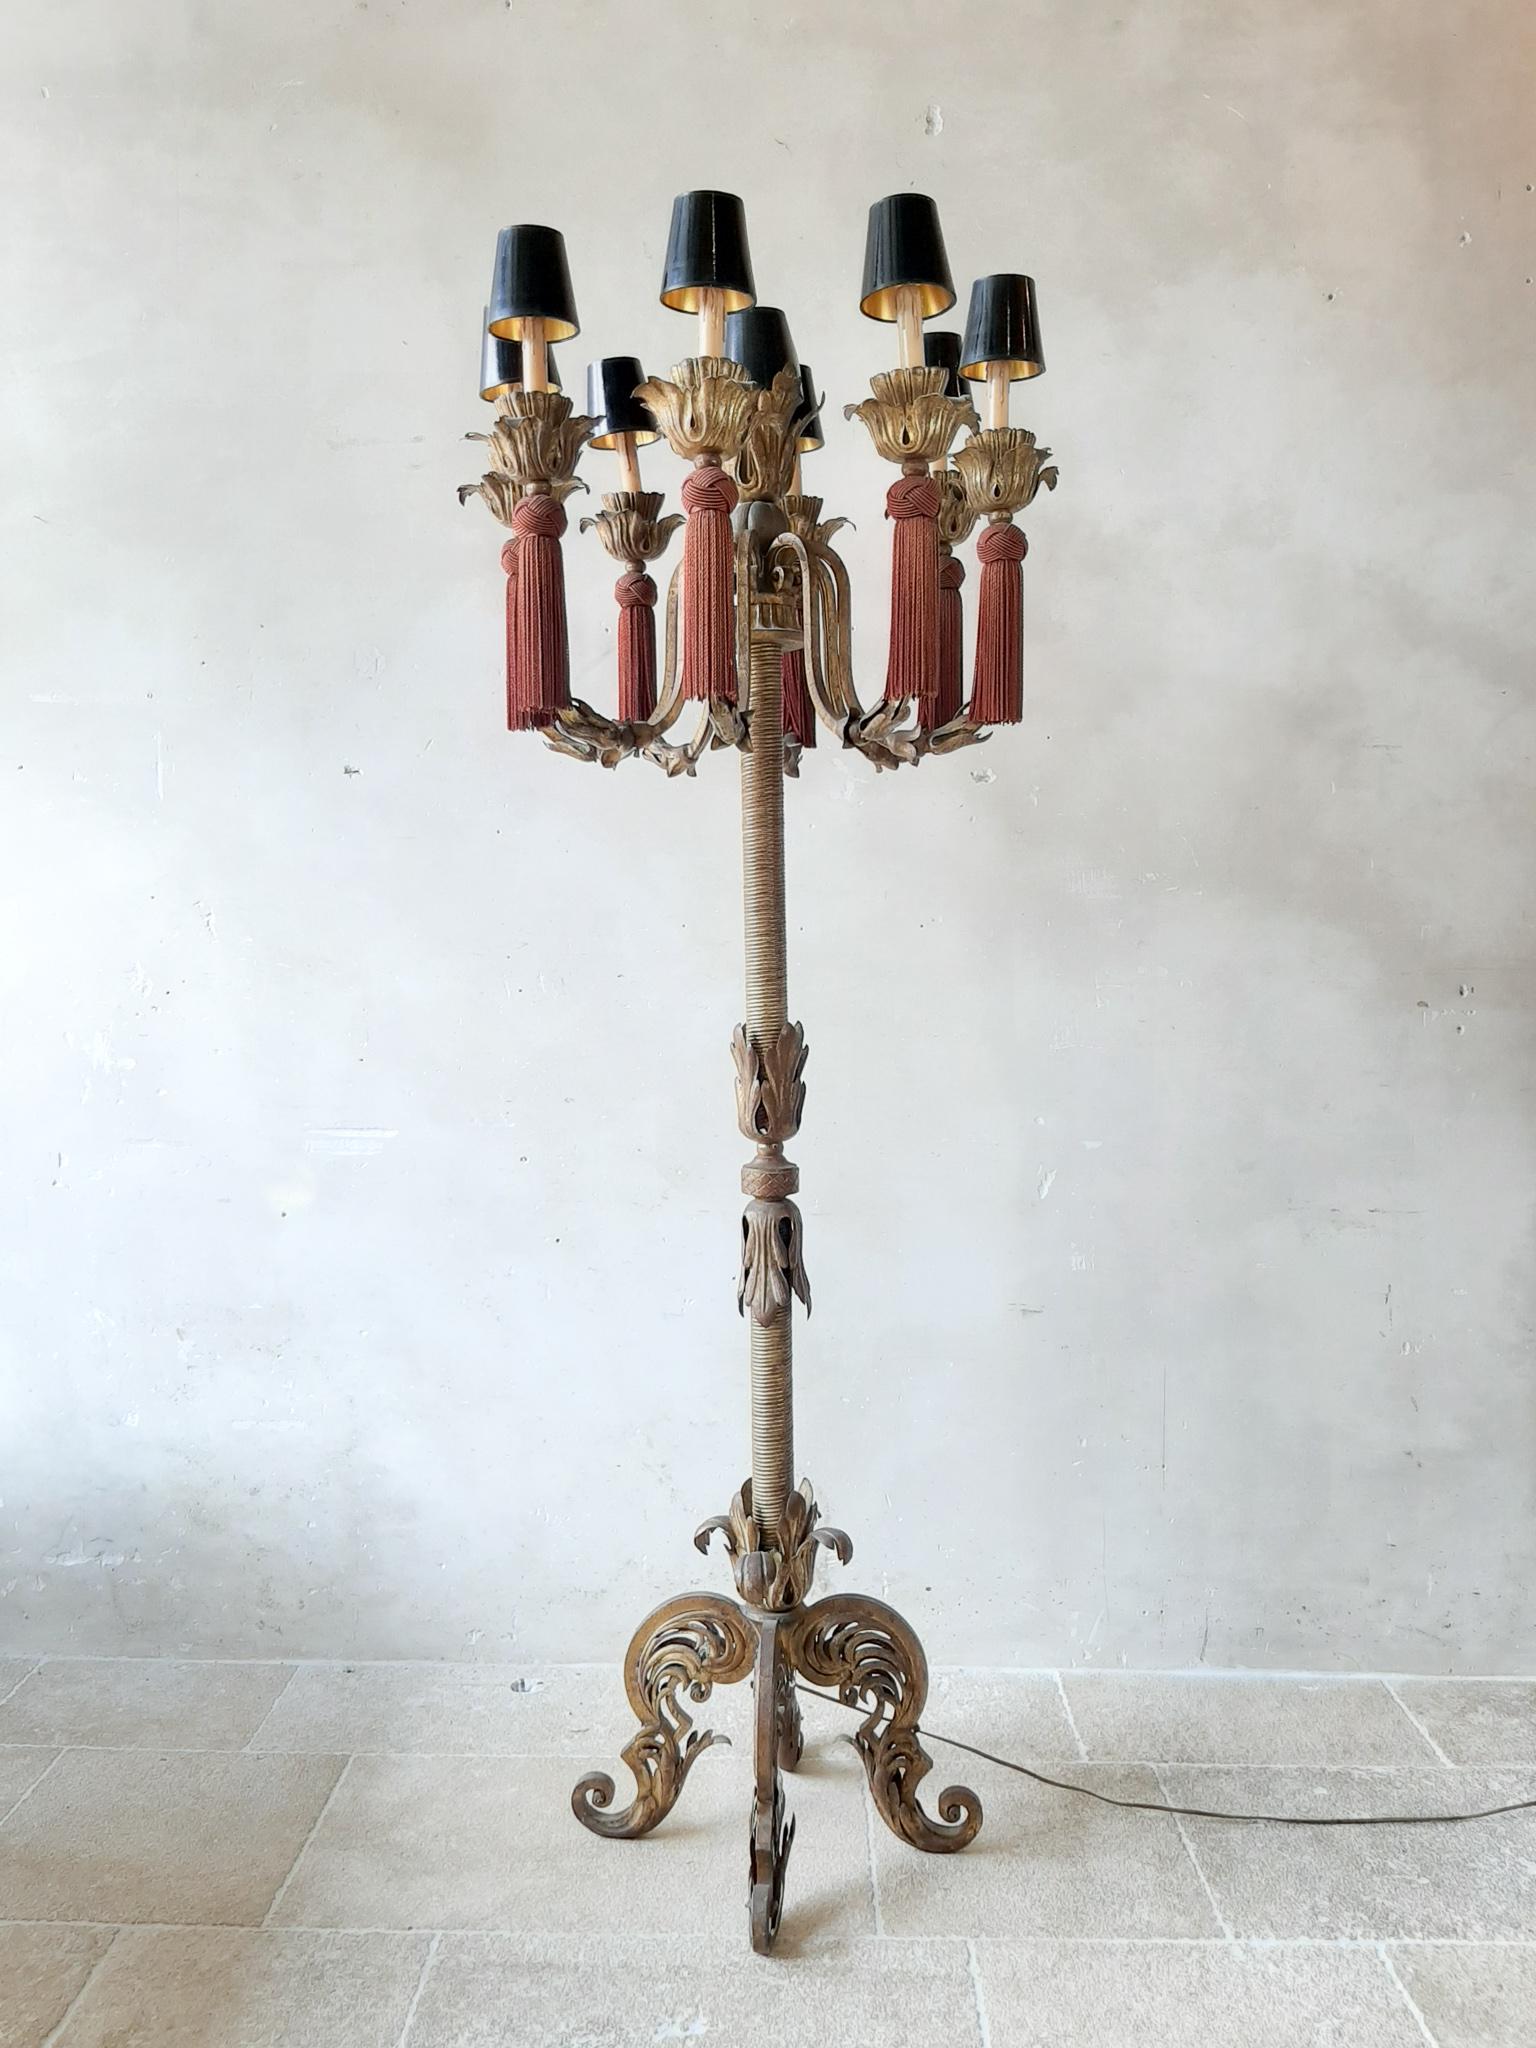 A large, richly decorated, vintage French floor lamp, antique design. The heavy metal armature, the shaft and the base are covered with golden patinated brass and provide the warm color in 'old' gold. The floor lamp has 9-light points with black